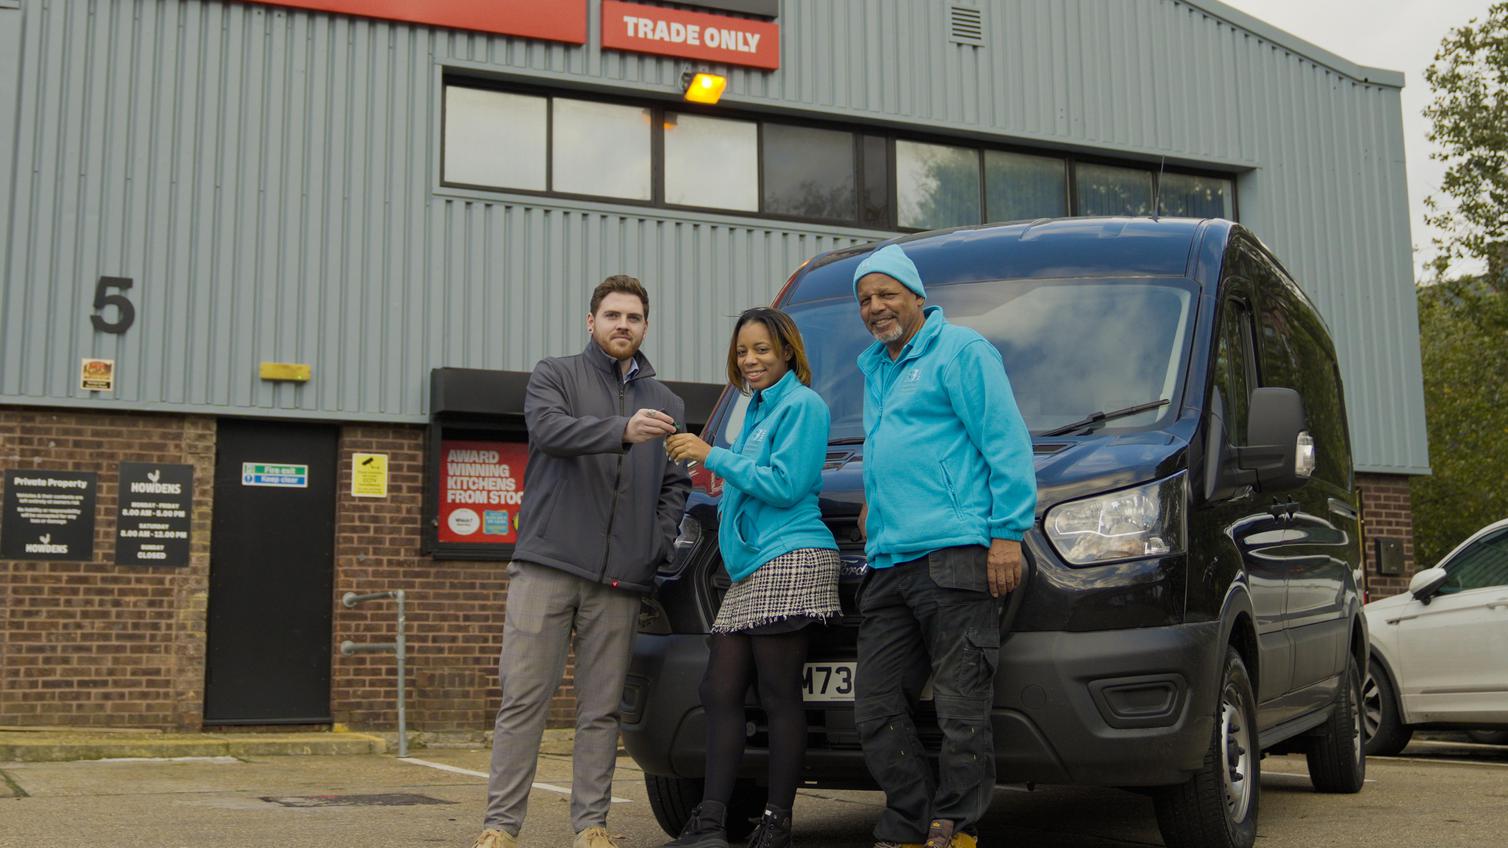 The winners of our win a van competition receiving the keys to their new vehicle